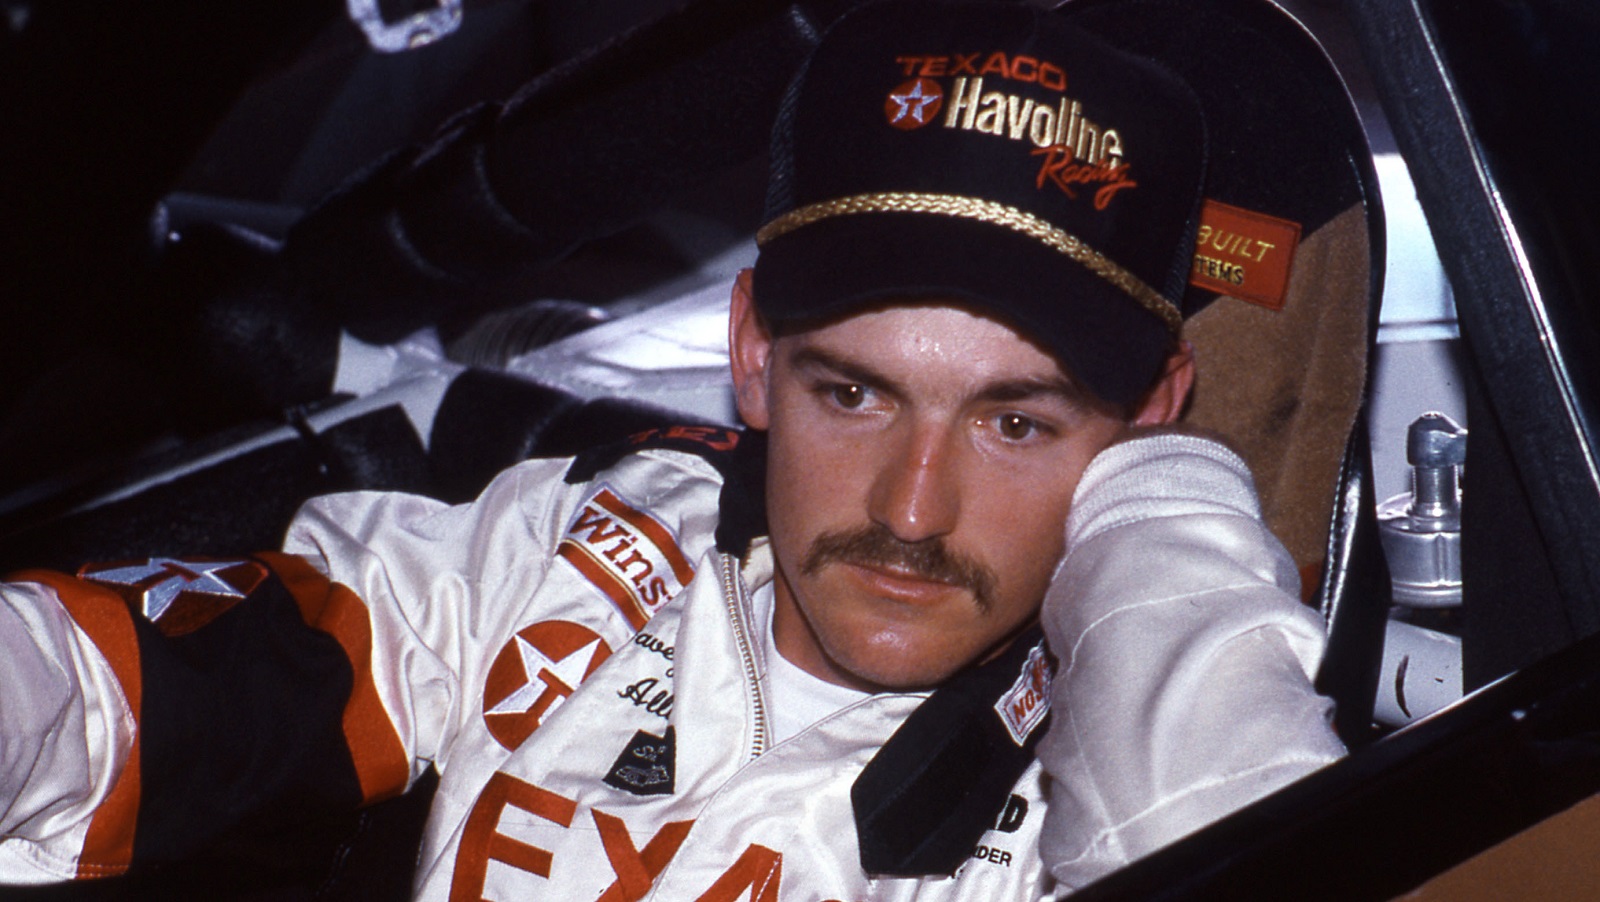 Davey Allison prior to a 1991 NASCAR Cup Series race for Robert Yates Racing, | ISC Images & Archives via Getty Images